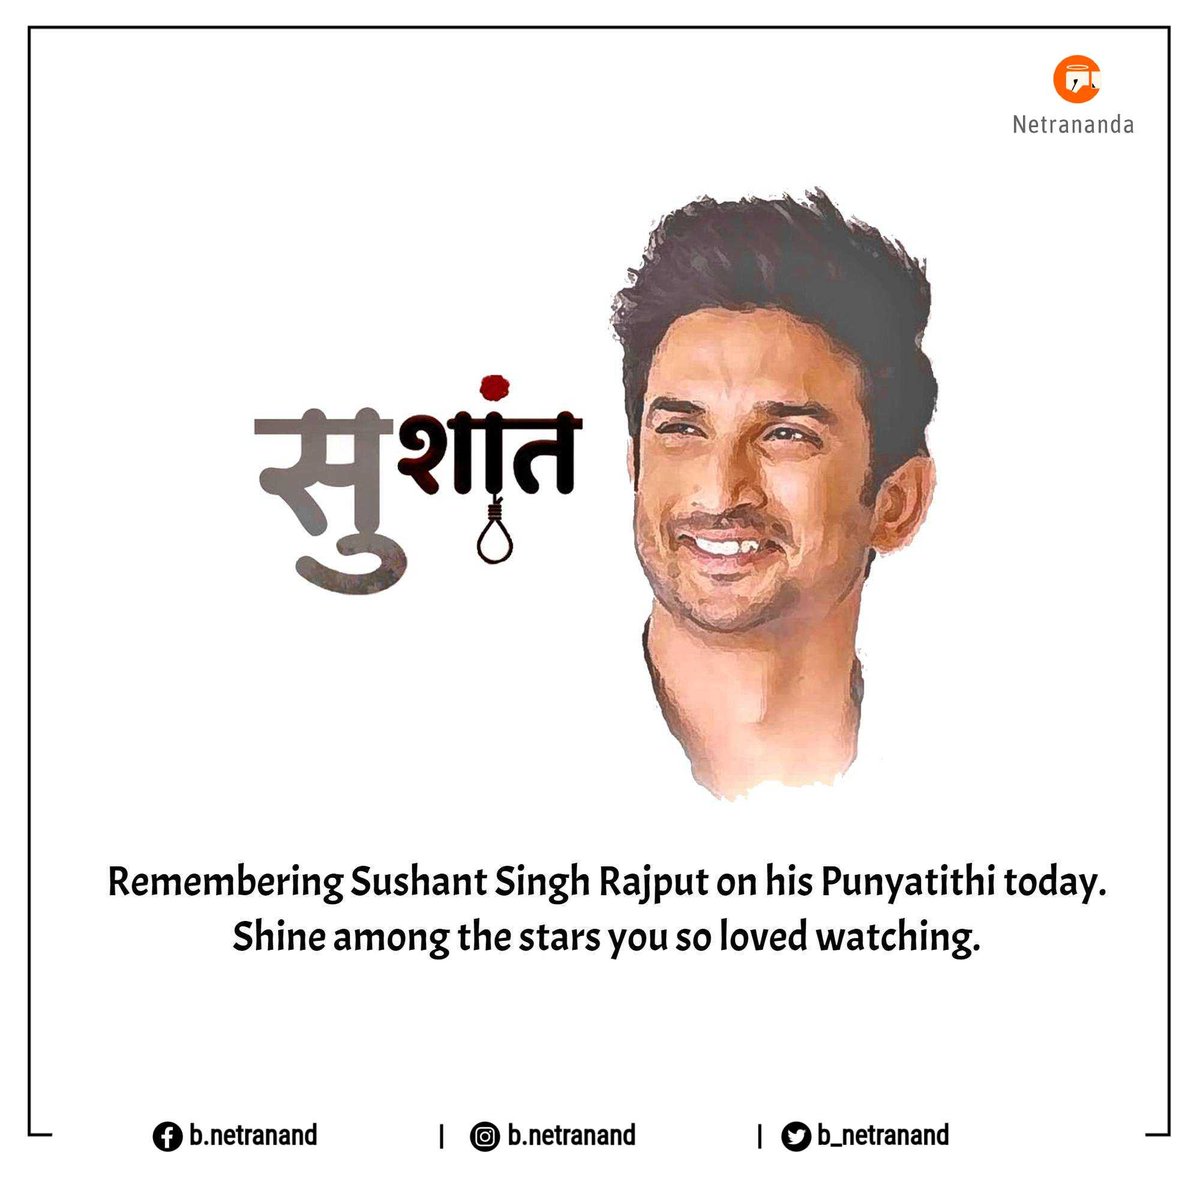 Remembering Sushant Singh Rajput on his death anniversary today. A talented actor who left an indelible mark on the film industry. May his soul find eternal peace. #SushantSinghRajput #RememberingSSR